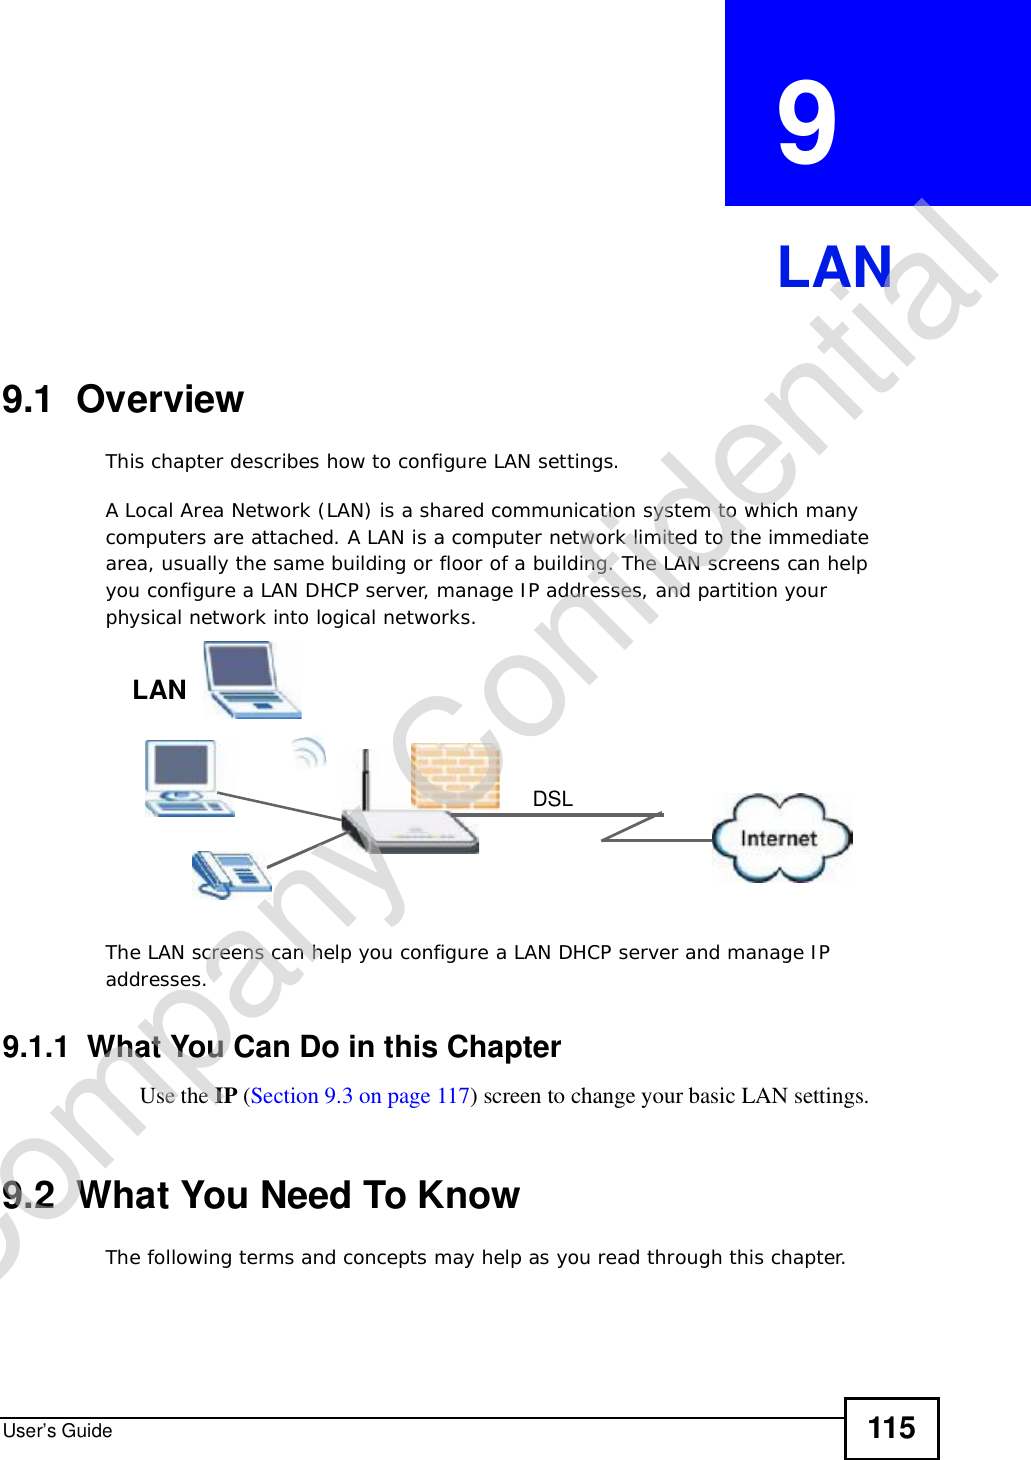 User’s Guide 115CHAPTER  9 LAN9.1  OverviewThis chapter describes how to configure LAN settings.A Local Area Network (LAN) is a shared communication system to which many computers are attached. A LAN is a computer network limited to the immediate area, usually the same building or floor of a building. The LAN screens can help you configure a LAN DHCP server, manage IP addresses, and partition your physical network into logical networks.The LAN screens can help you configure a LAN DHCP server and manage IP addresses.9.1.1  What You Can Do in this ChapterUse the IP (Section 9.3 on page 117) screen to change your basic LAN settings.9.2  What You Need To KnowThe following terms and concepts may help as you read through this chapter.DSLLANCompany Confidential